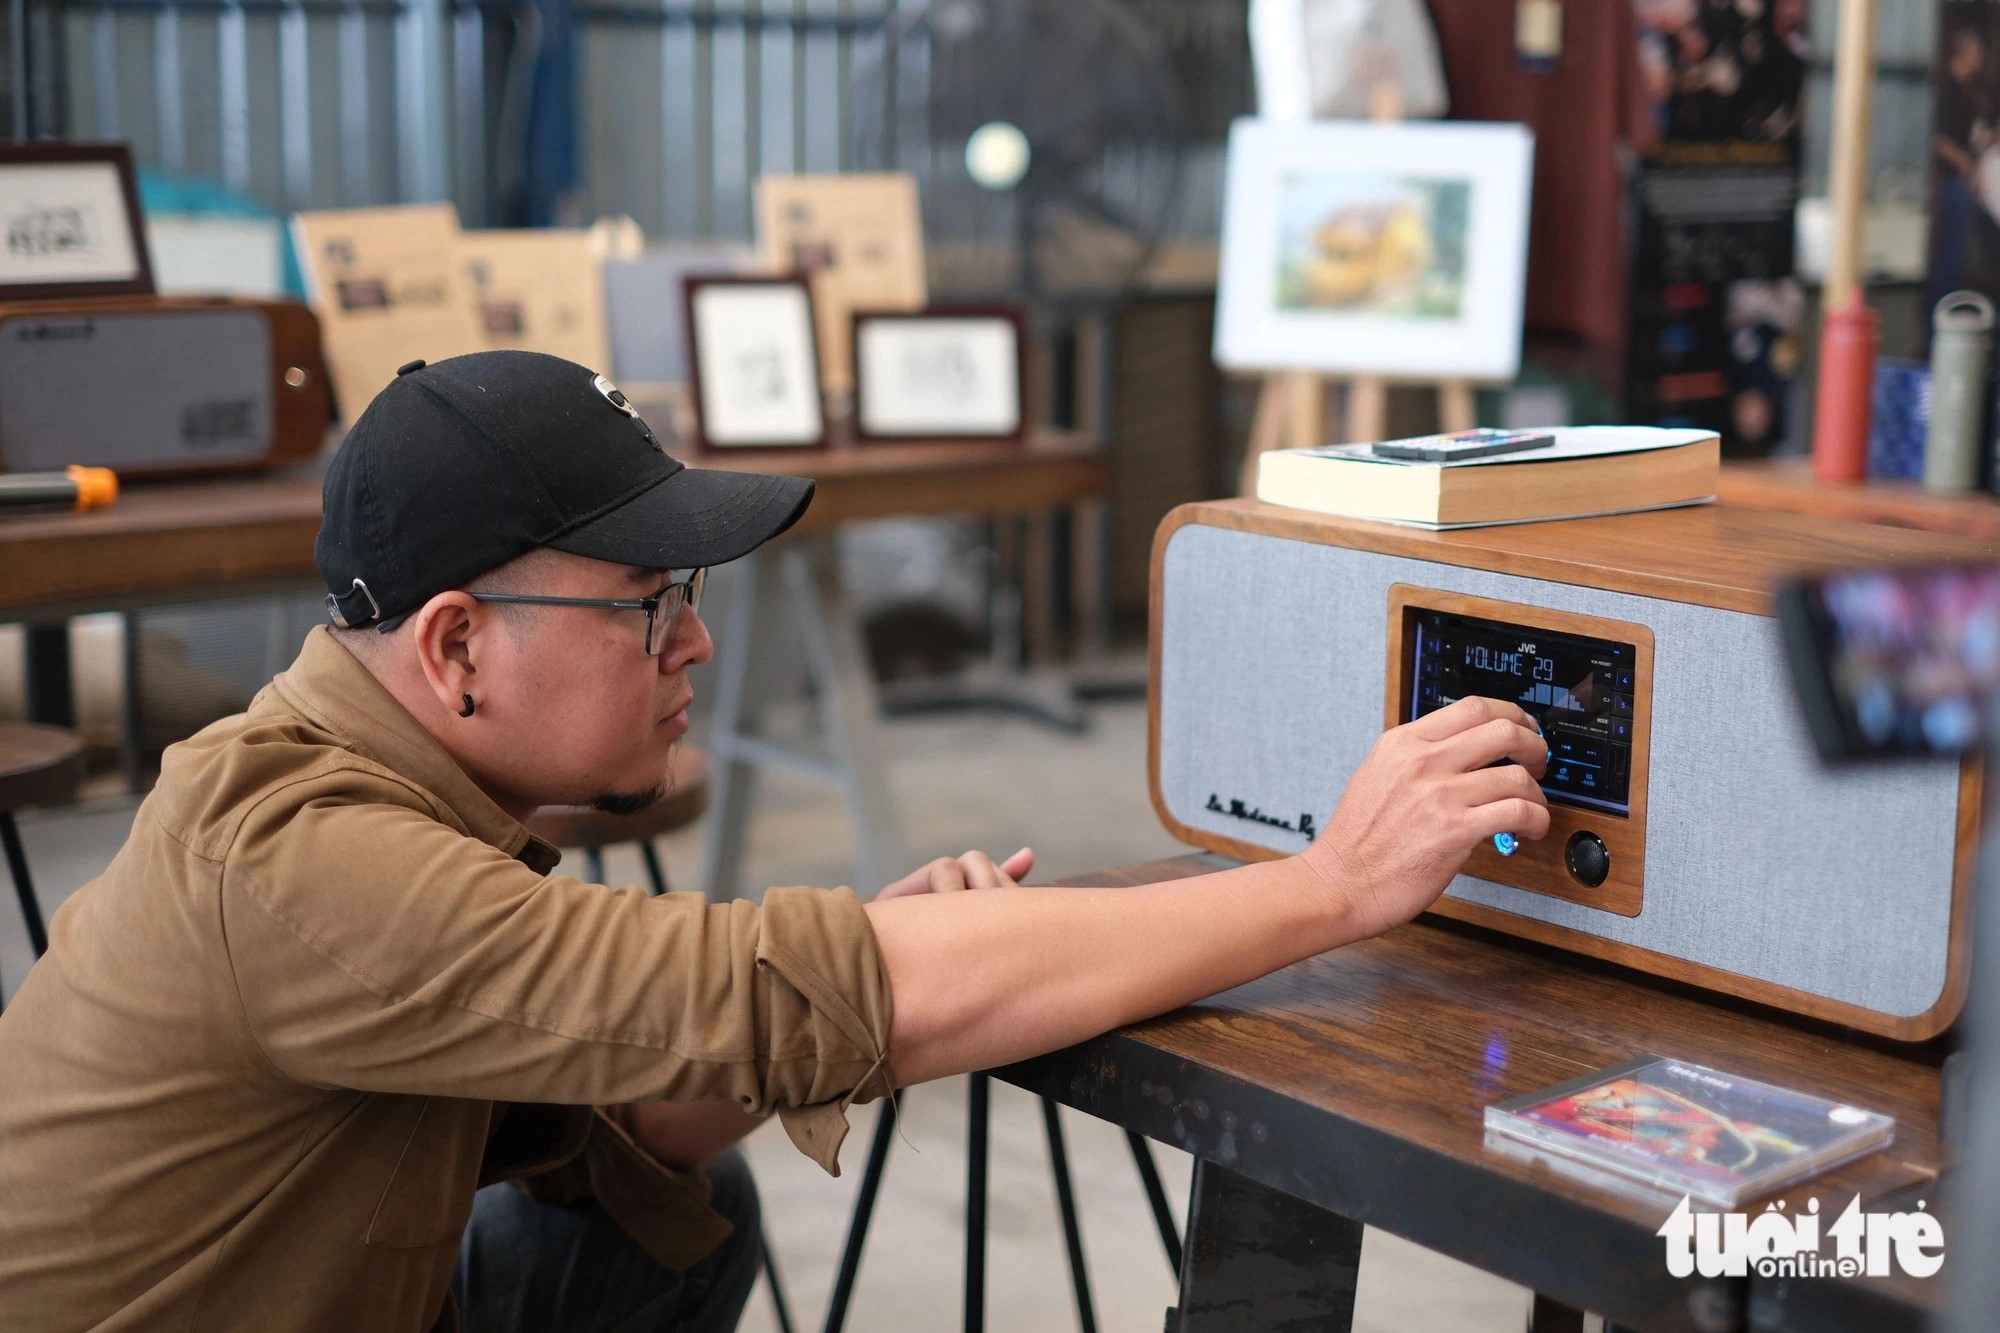 Architect Lam Thanh Tung proudly highlights his handmade music player creation. Photo: M.V. / Tuoi Tre